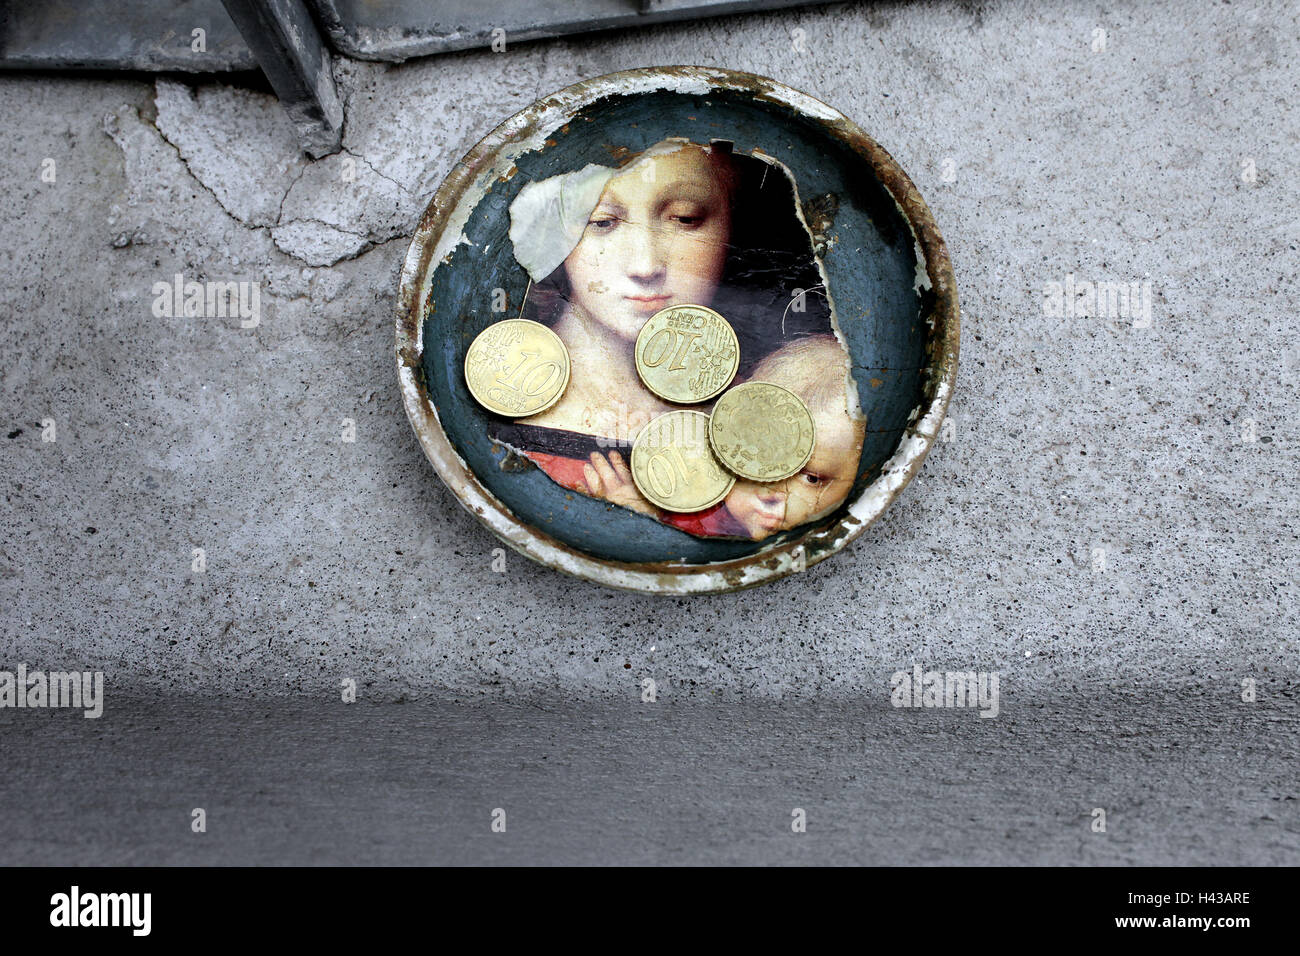 Plate, money, coins, Stock Photo